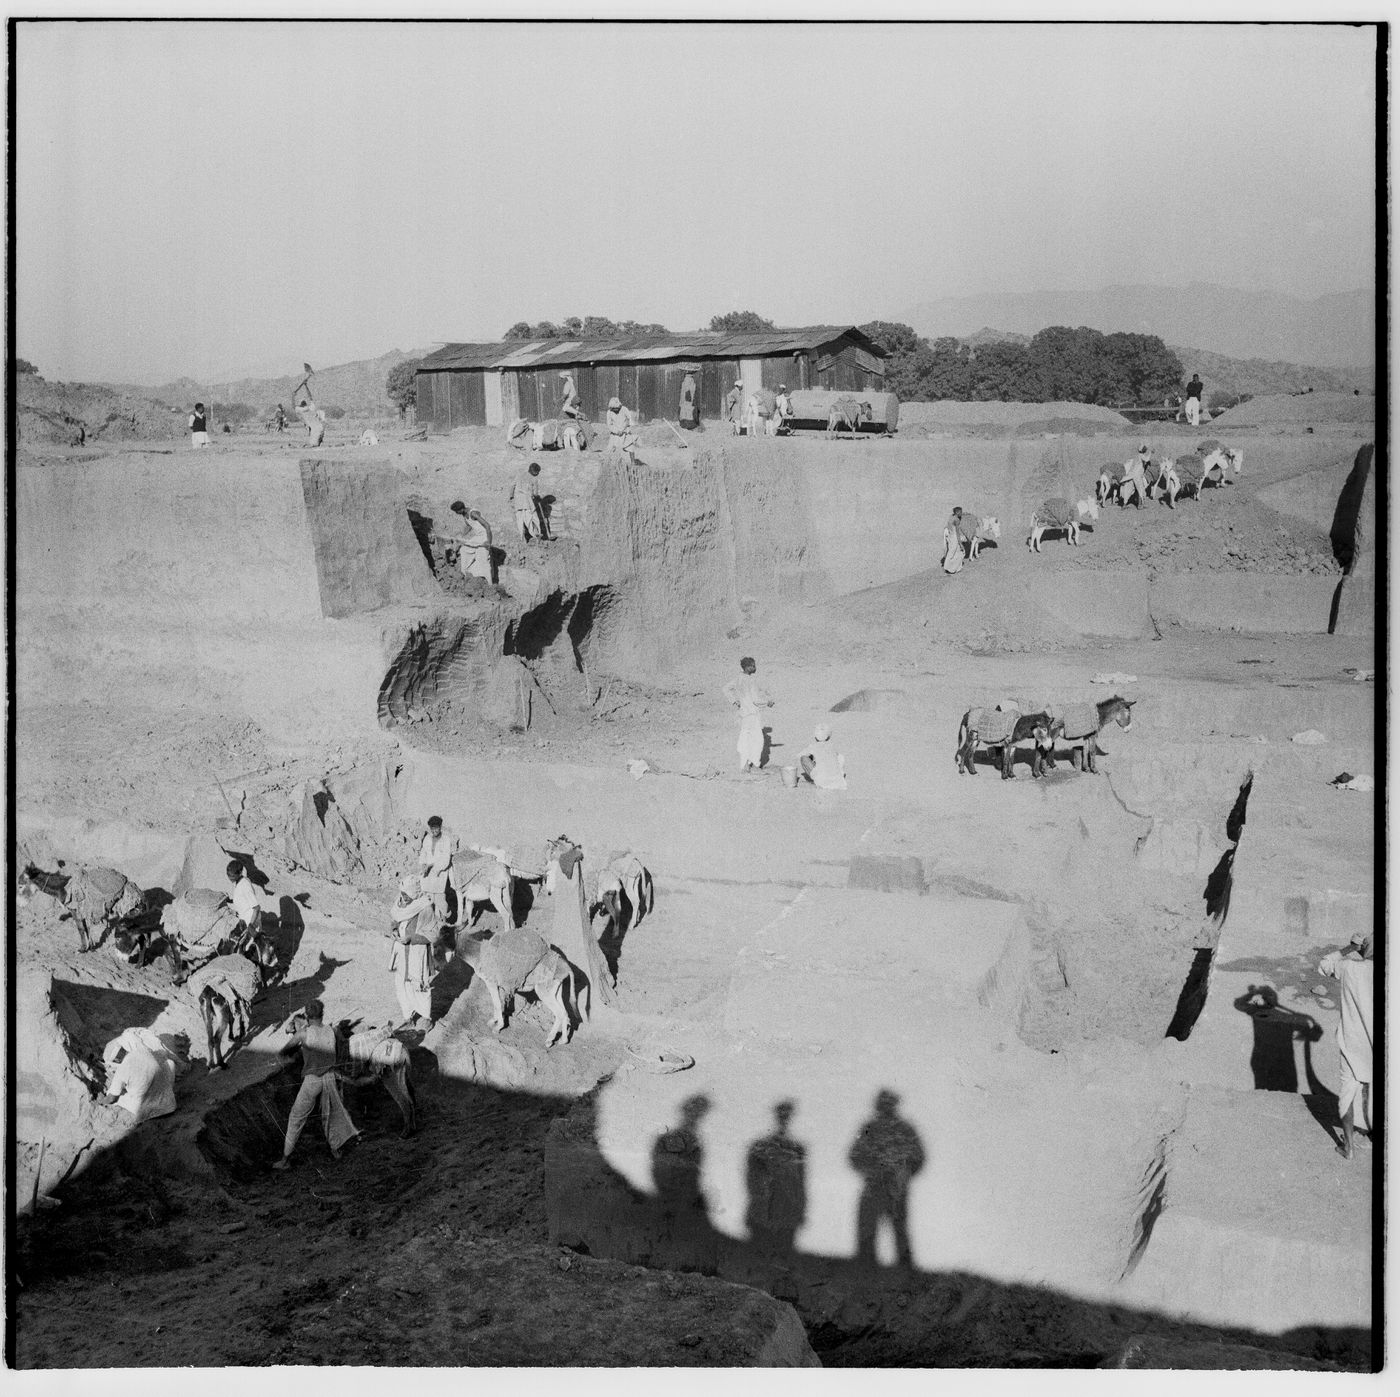 Excavation of the foundations for the High Court Building, Chandigarh, India (with shadows of Le Corbusier, Jeet Malhotra and Pierre Jeanneret in the foreground)